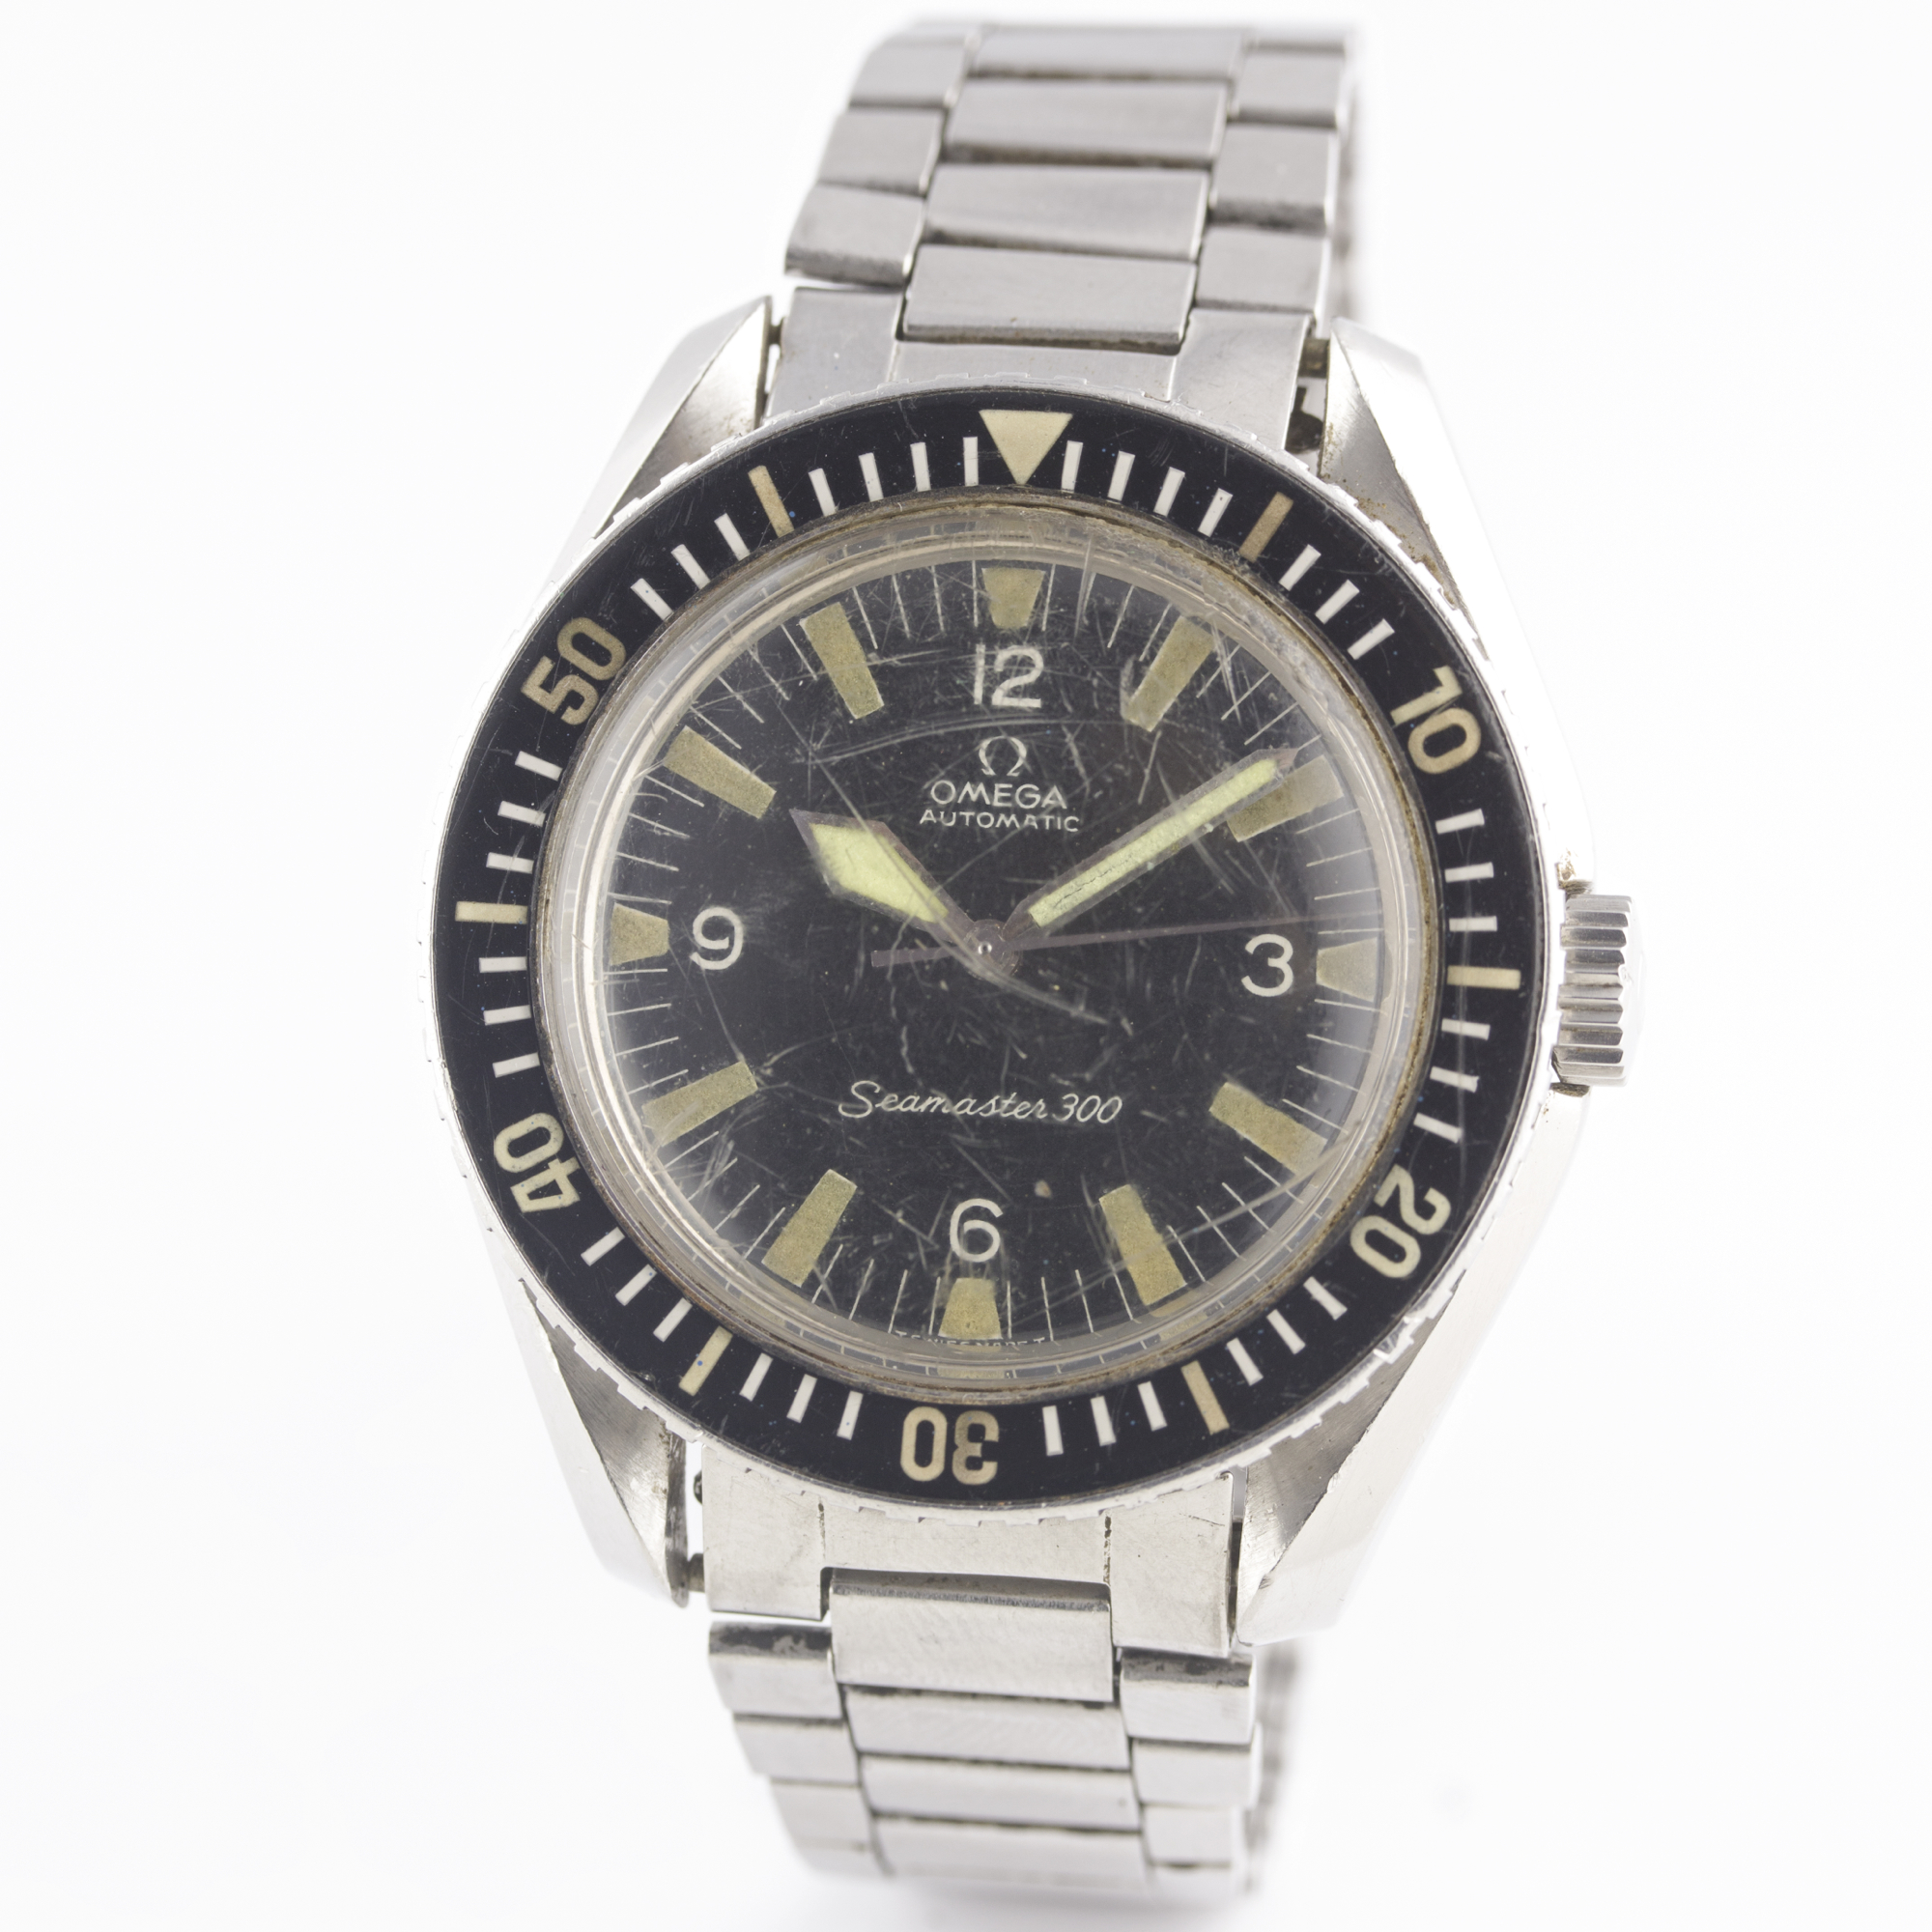 A RARE GENTLEMAN'S STAINLESS STEEL OMEGA SEAMASTER 300 BRACELET WATCH CIRCA 1967, REF. 165024 - Image 3 of 8